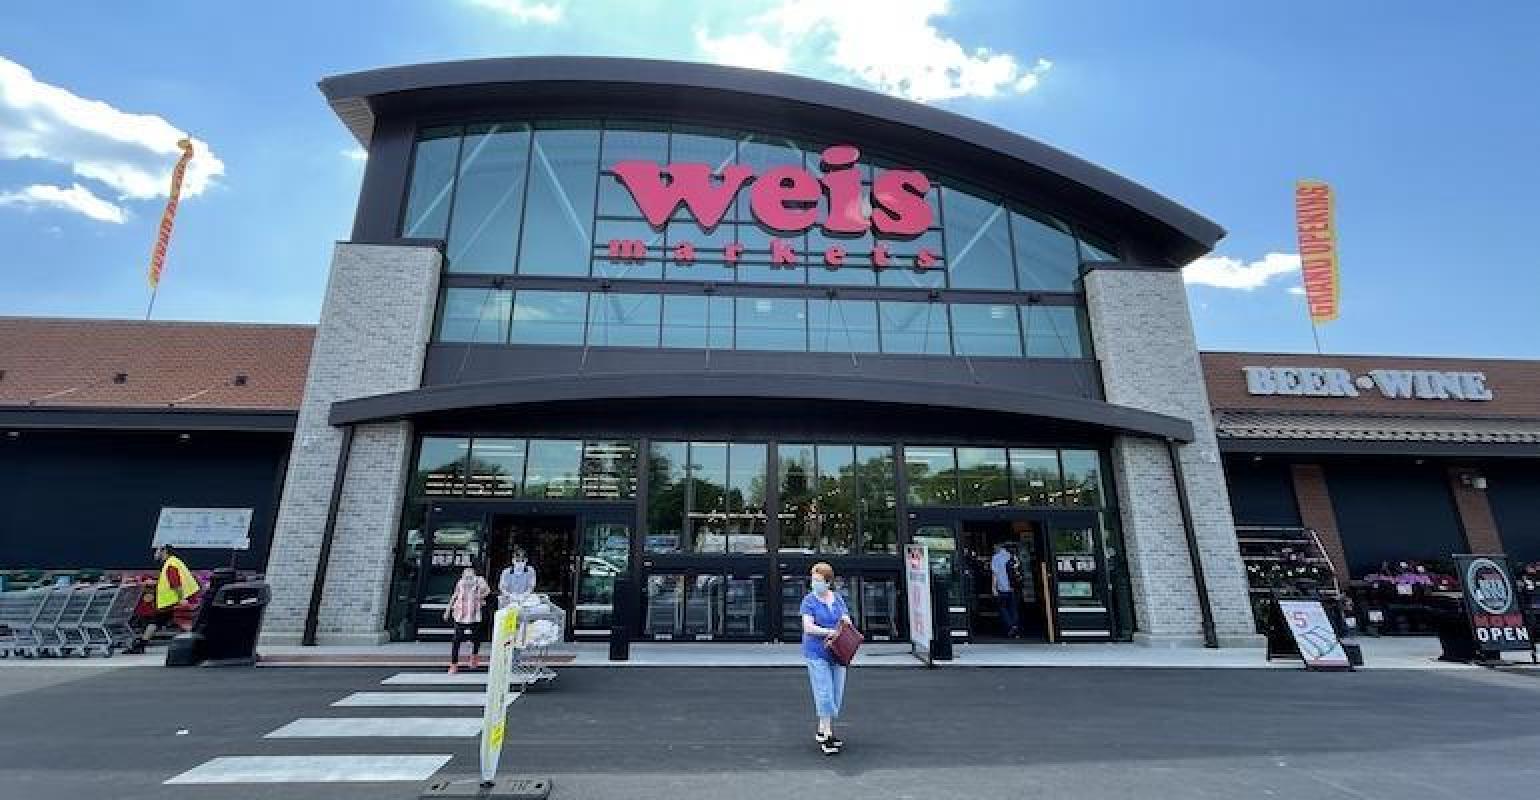 WEIS MARKETS COMPLETES REMODEL OF MILLERSBURG STORE